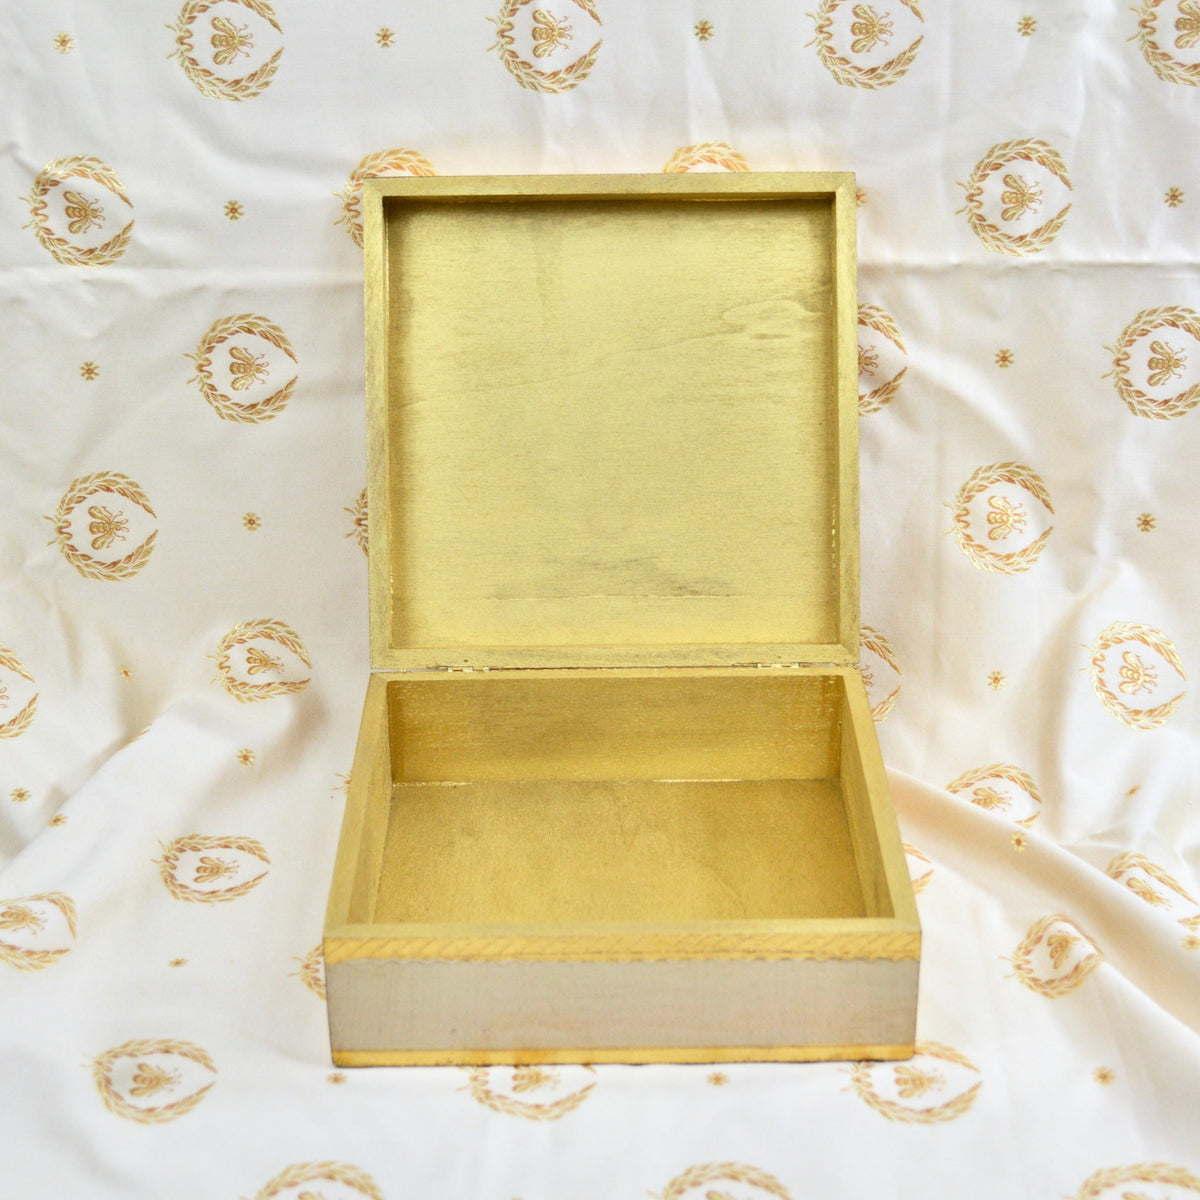 Florentine Gilded Wood Storage Box, Square, Made In Italy - My Italian Decor